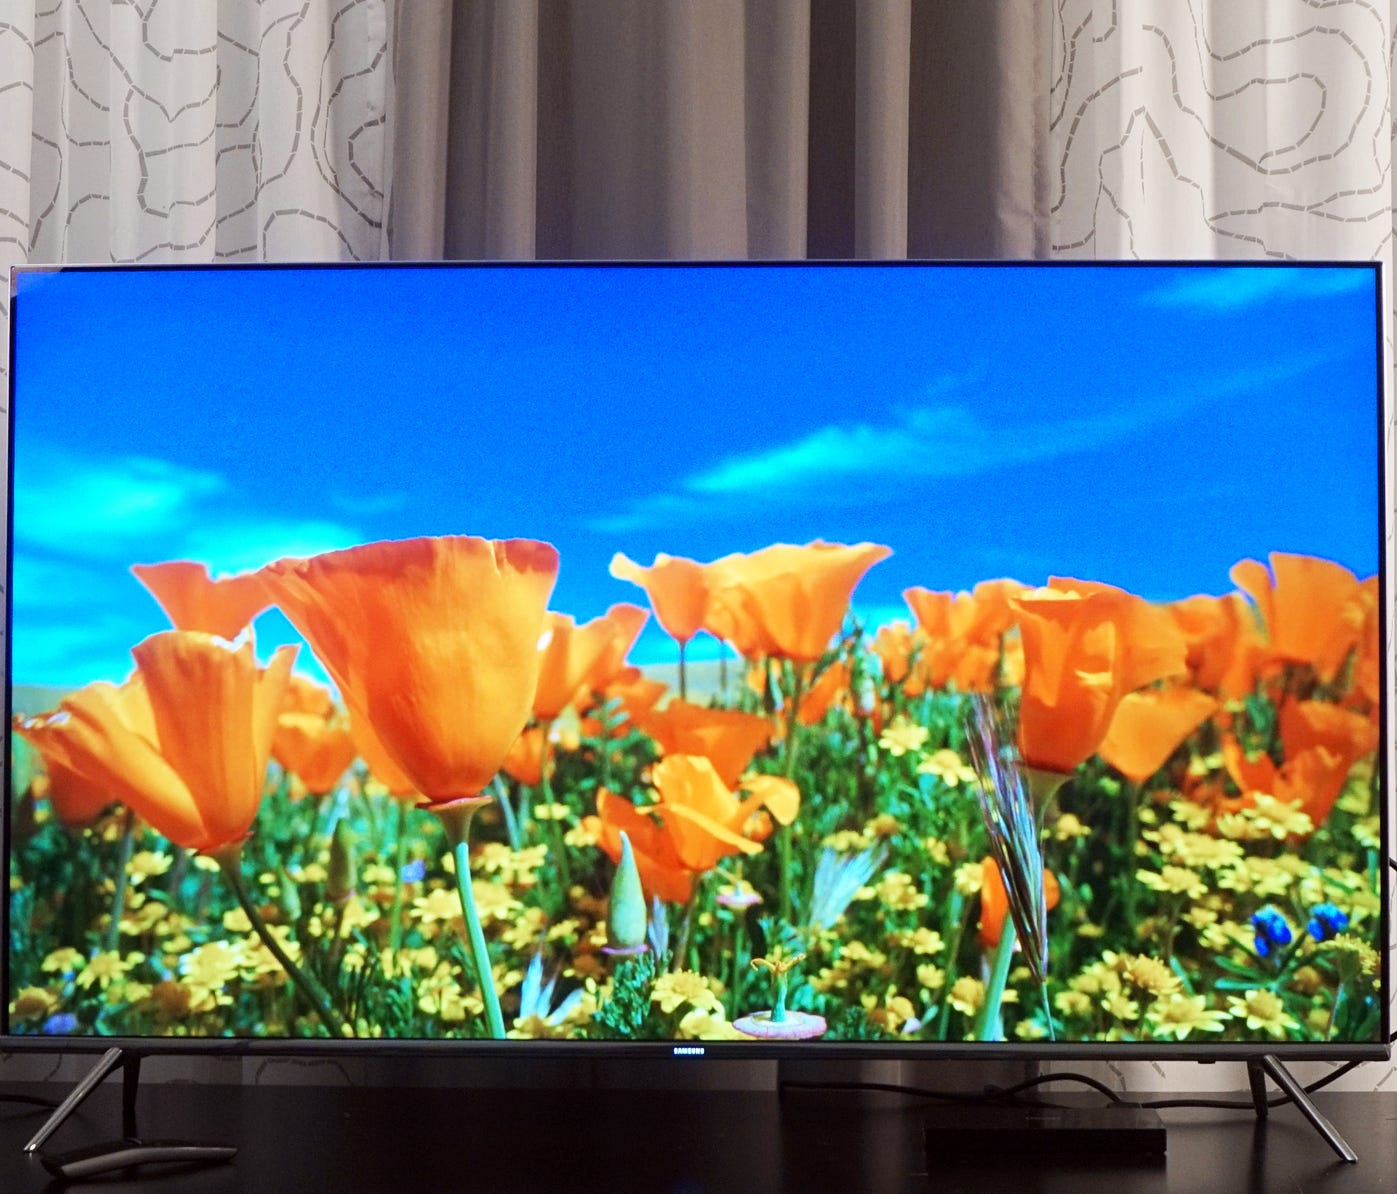 These are the best 60-inch TVs you can buy.